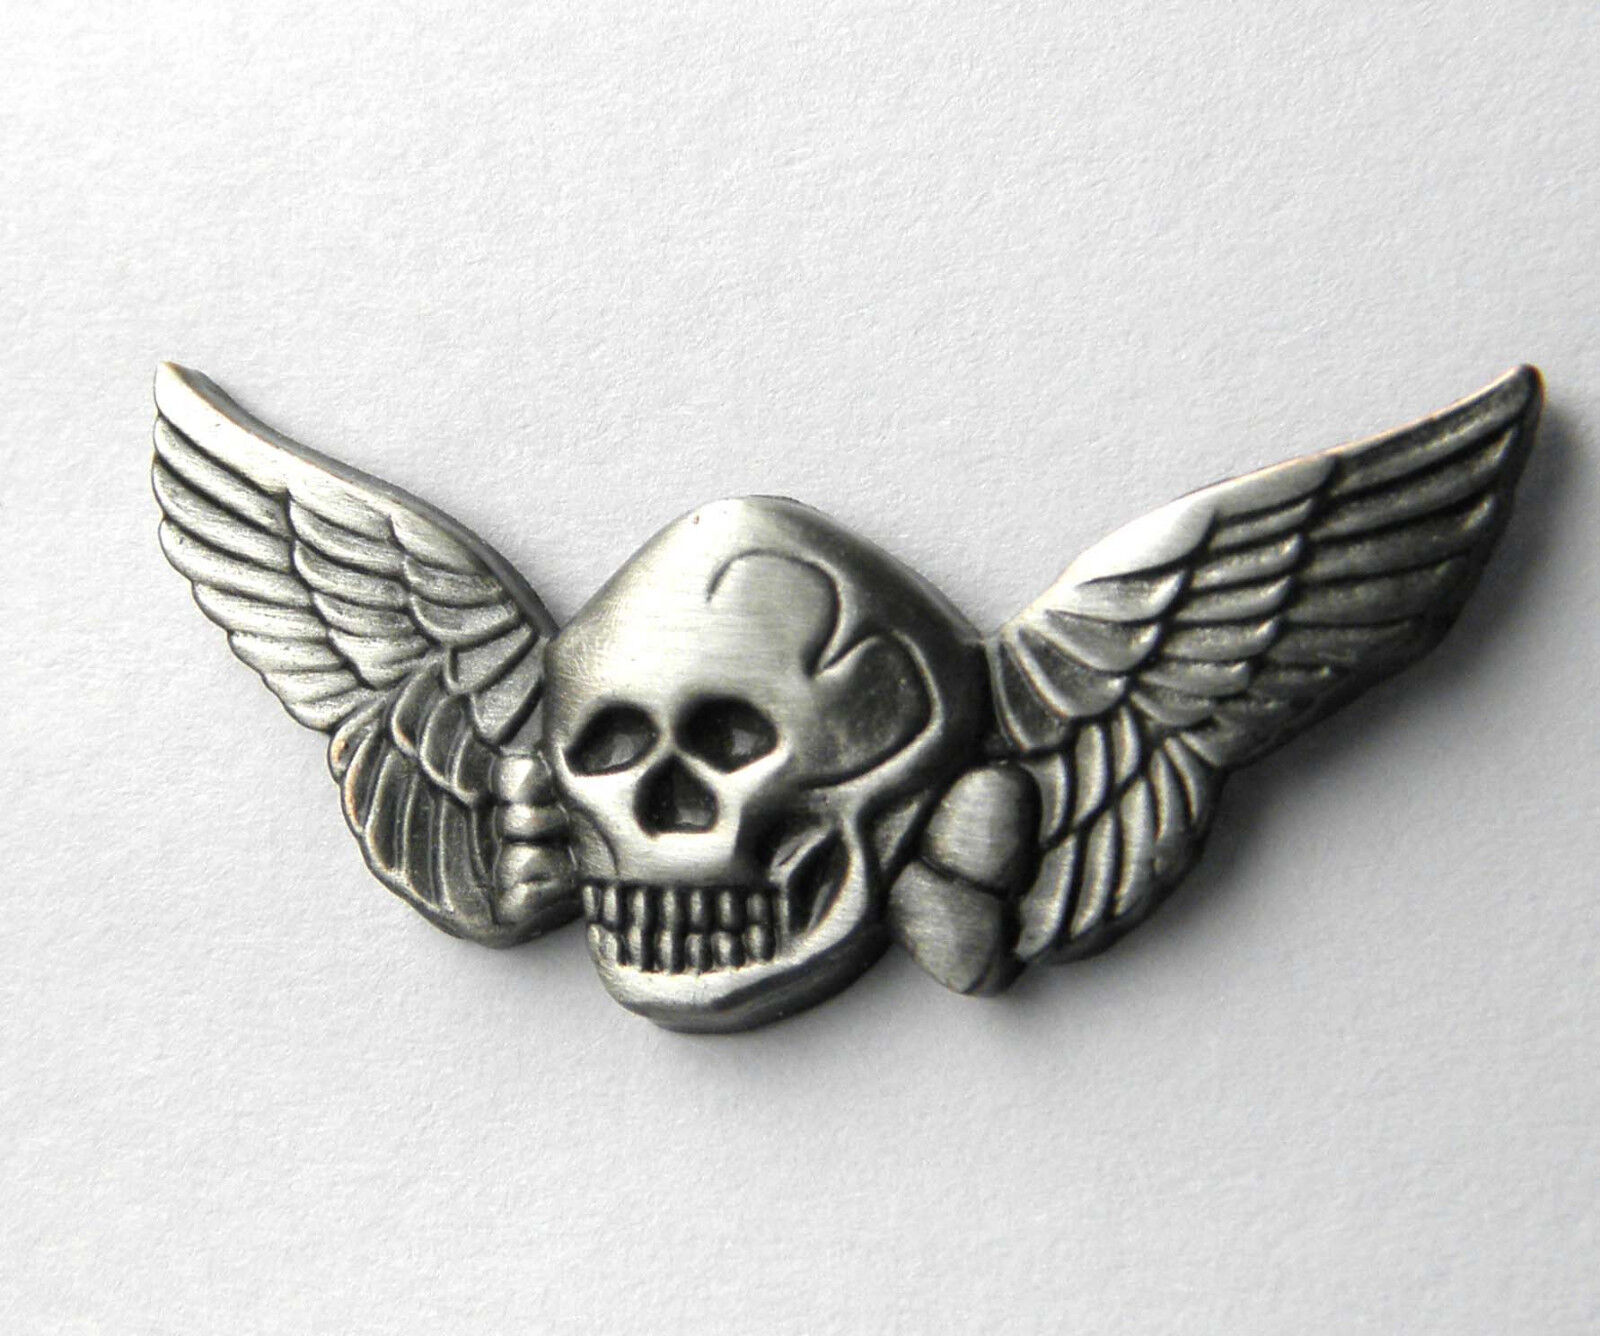 Skull Death Wings Biker Special Forces Small Jacket Lapel Pin 1.25 inches